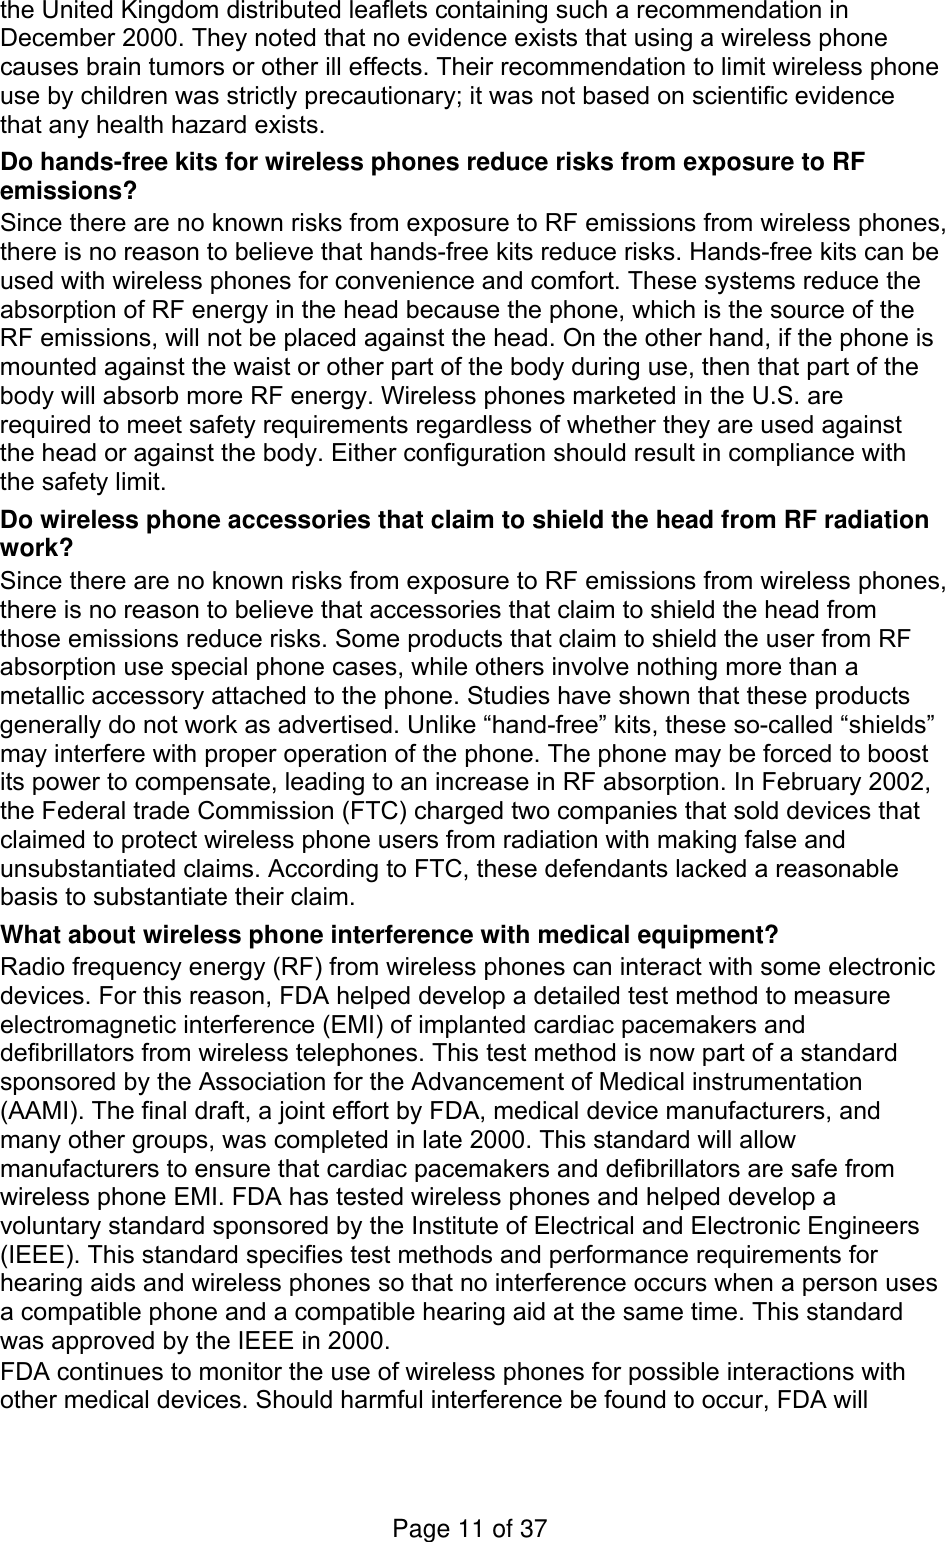 the United Kingdom distributed leaflets containing such a recommendation in December 2000. They noted that no evidence exists that using a wireless phone causes brain tumors or other ill effects. Their recommendation to limit wireless phone use by children was strictly precautionary; it was not based on scientific evidence that any health hazard exists.   Do hands-free kits for wireless phones reduce risks from exposure to RF emissions? Since there are no known risks from exposure to RF emissions from wireless phones, there is no reason to believe that hands-free kits reduce risks. Hands-free kits can be used with wireless phones for convenience and comfort. These systems reduce the absorption of RF energy in the head because the phone, which is the source of the RF emissions, will not be placed against the head. On the other hand, if the phone is mounted against the waist or other part of the body during use, then that part of the body will absorb more RF energy. Wireless phones marketed in the U.S. are required to meet safety requirements regardless of whether they are used against the head or against the body. Either configuration should result in compliance with the safety limit. Do wireless phone accessories that claim to shield the head from RF radiation work? Since there are no known risks from exposure to RF emissions from wireless phones, there is no reason to believe that accessories that claim to shield the head from those emissions reduce risks. Some products that claim to shield the user from RF absorption use special phone cases, while others involve nothing more than a metallic accessory attached to the phone. Studies have shown that these products generally do not work as advertised. Unlike “hand-free” kits, these so-called “shields” may interfere with proper operation of the phone. The phone may be forced to boost its power to compensate, leading to an increase in RF absorption. In February 2002, the Federal trade Commission (FTC) charged two companies that sold devices that claimed to protect wireless phone users from radiation with making false and unsubstantiated claims. According to FTC, these defendants lacked a reasonable basis to substantiate their claim. What about wireless phone interference with medical equipment? Radio frequency energy (RF) from wireless phones can interact with some electronic devices. For this reason, FDA helped develop a detailed test method to measure electromagnetic interference (EMI) of implanted cardiac pacemakers and defibrillators from wireless telephones. This test method is now part of a standard sponsored by the Association for the Advancement of Medical instrumentation (AAMI). The final draft, a joint effort by FDA, medical device manufacturers, and many other groups, was completed in late 2000. This standard will allow manufacturers to ensure that cardiac pacemakers and defibrillators are safe from wireless phone EMI. FDA has tested wireless phones and helped develop a voluntary standard sponsored by the Institute of Electrical and Electronic Engineers (IEEE). This standard specifies test methods and performance requirements for hearing aids and wireless phones so that no interference occurs when a person uses a compatible phone and a compatible hearing aid at the same time. This standard was approved by the IEEE in 2000. FDA continues to monitor the use of wireless phones for possible interactions with other medical devices. Should harmful interference be found to occur, FDA will Page 11 of 37